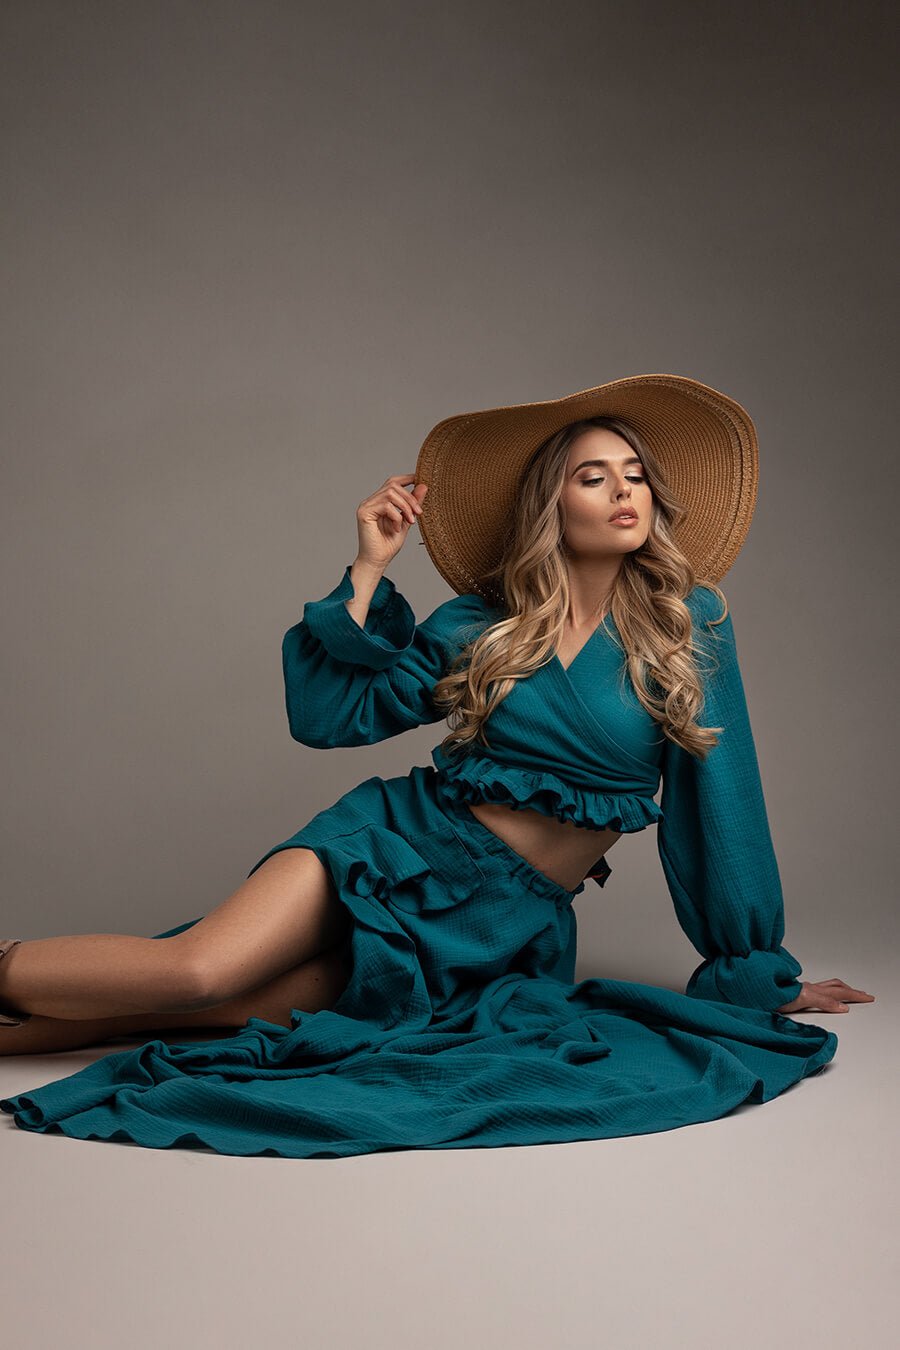 blond model poses laying on the studio floor, leaning with one hand on the floor and the other touching the ending of a big brown hat on her head. she is wearing a boho western chic outfit in petrol color, with long sleeves and ruffle details